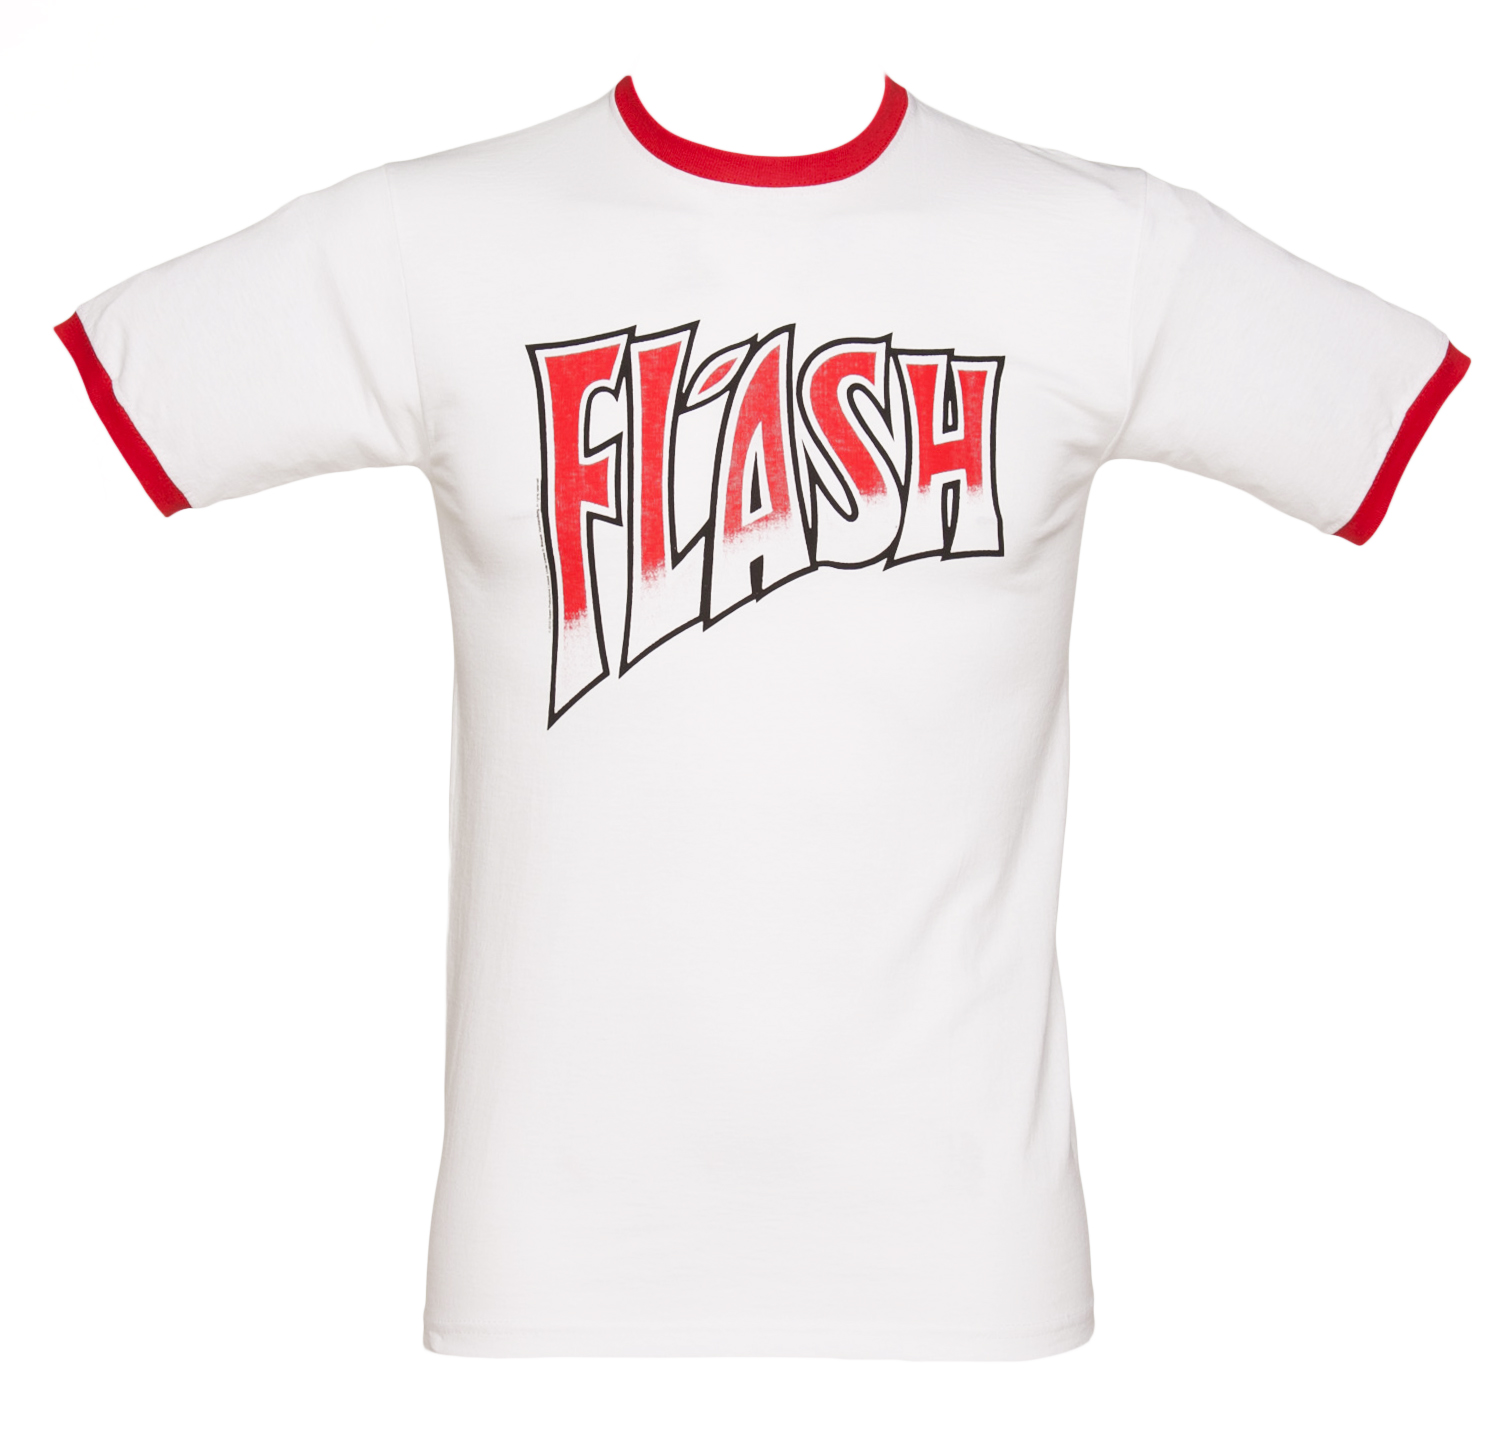 Queen Flash White And Red Ringer T-Shirt